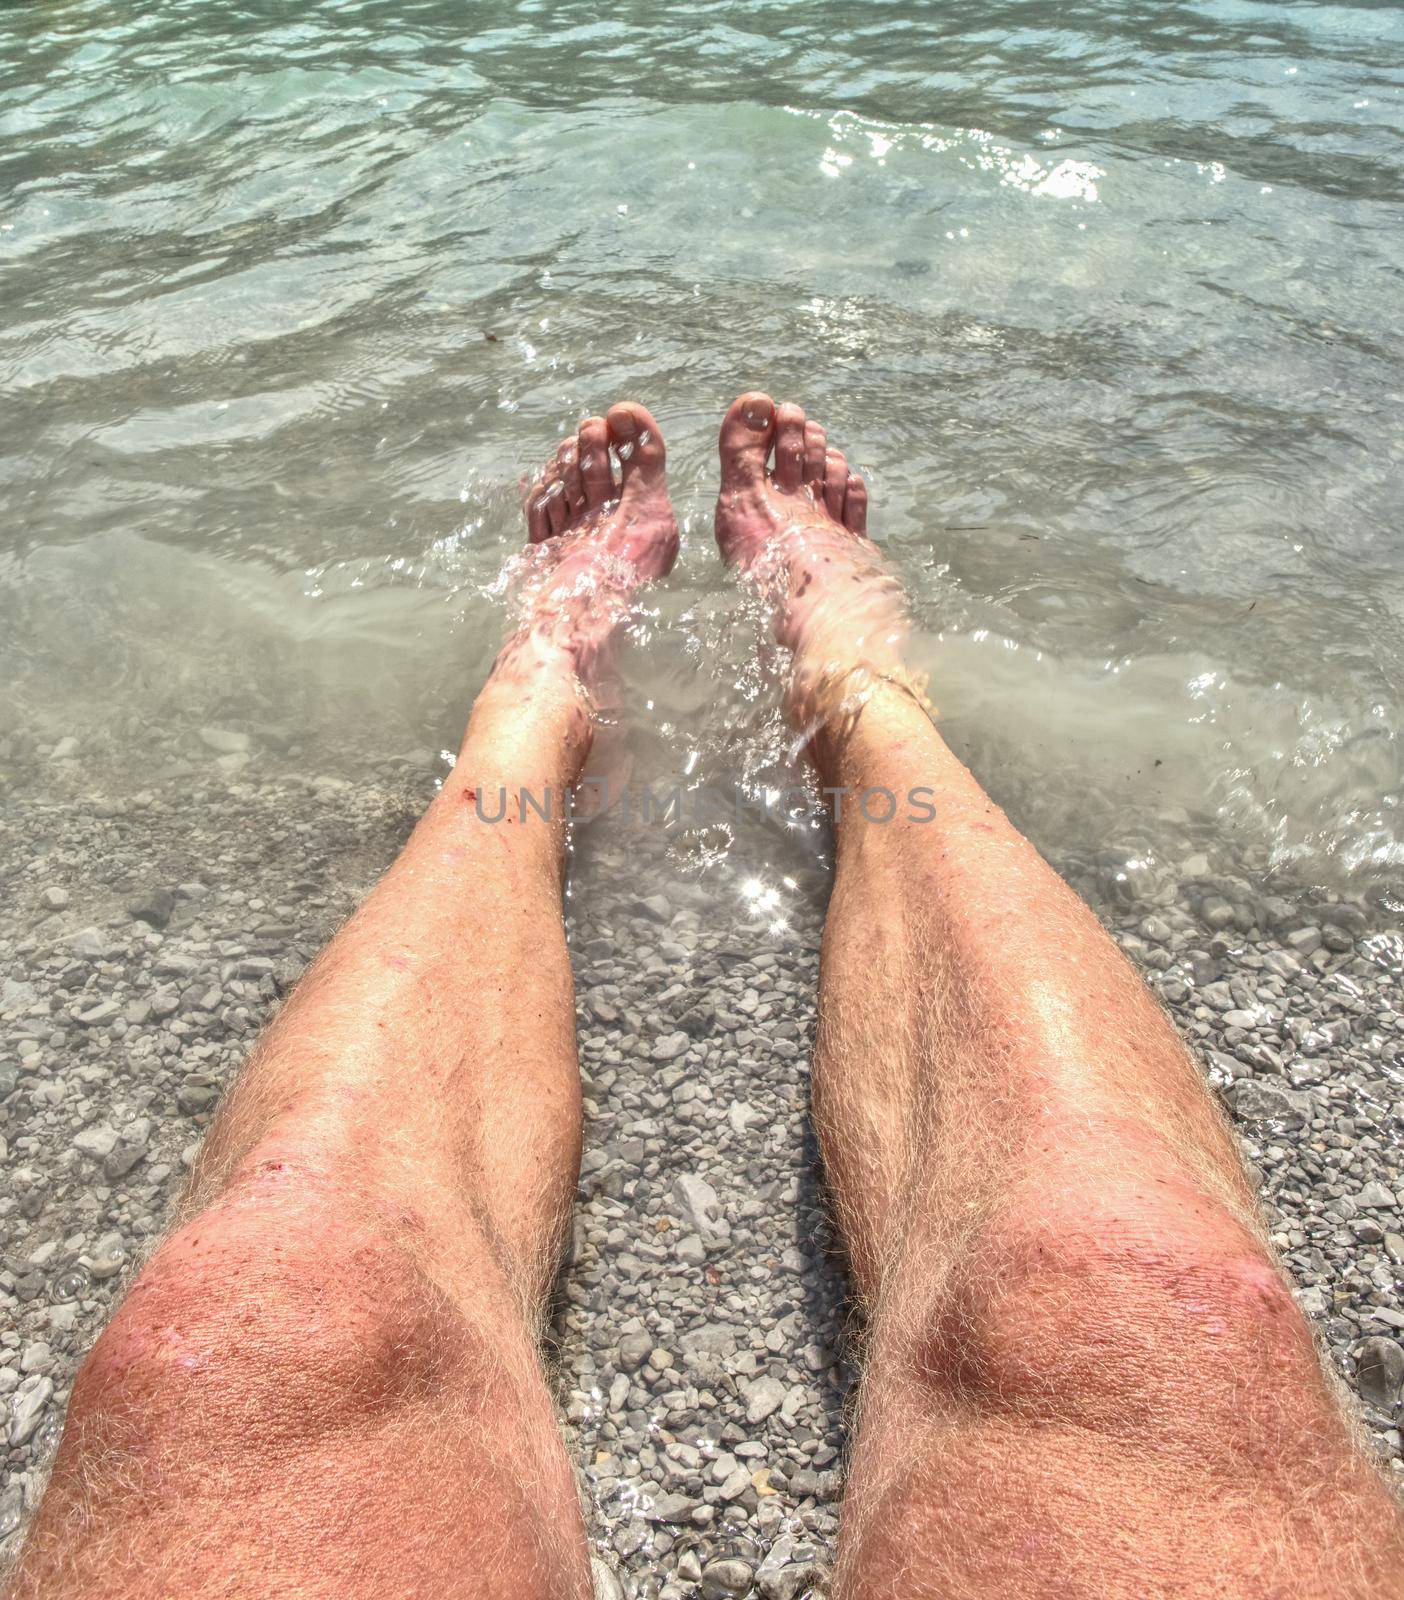 Legs and feet on stones of the beach with the lake or sea water. by rdonar2